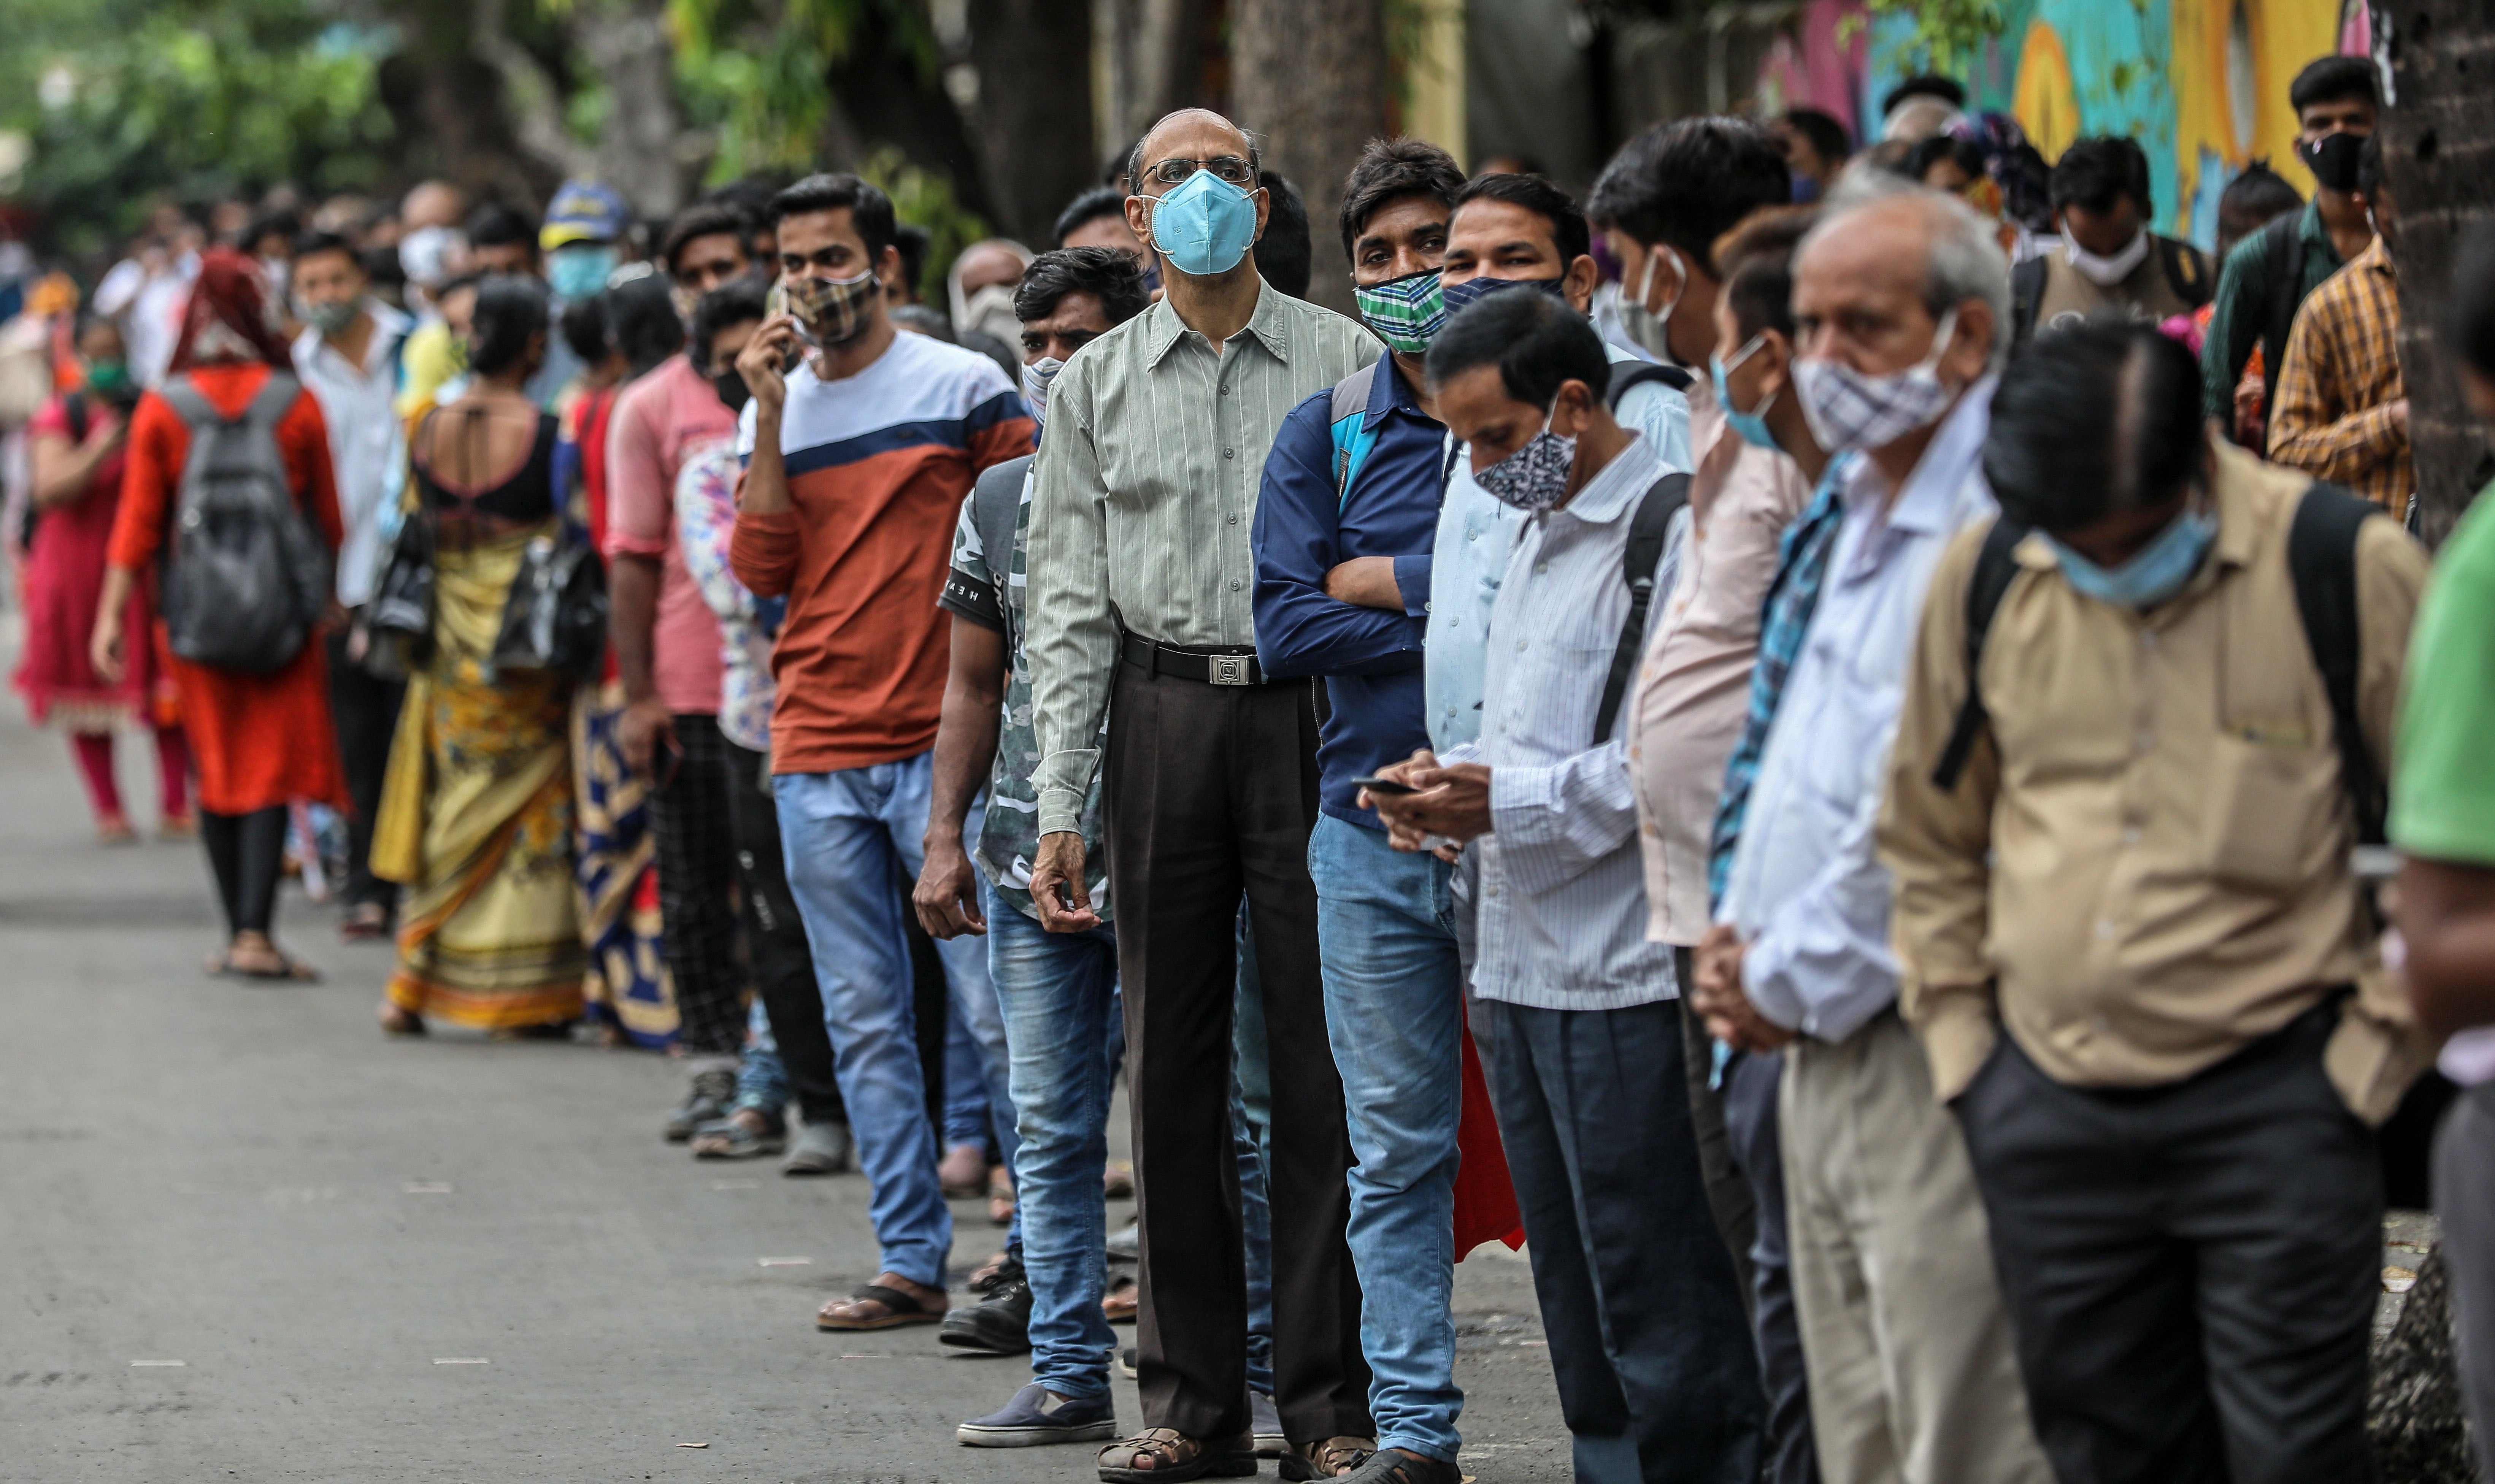 People stand in a queue as they wait for public transport at a bus stop in Mumbai, India, on 8 June, 2021